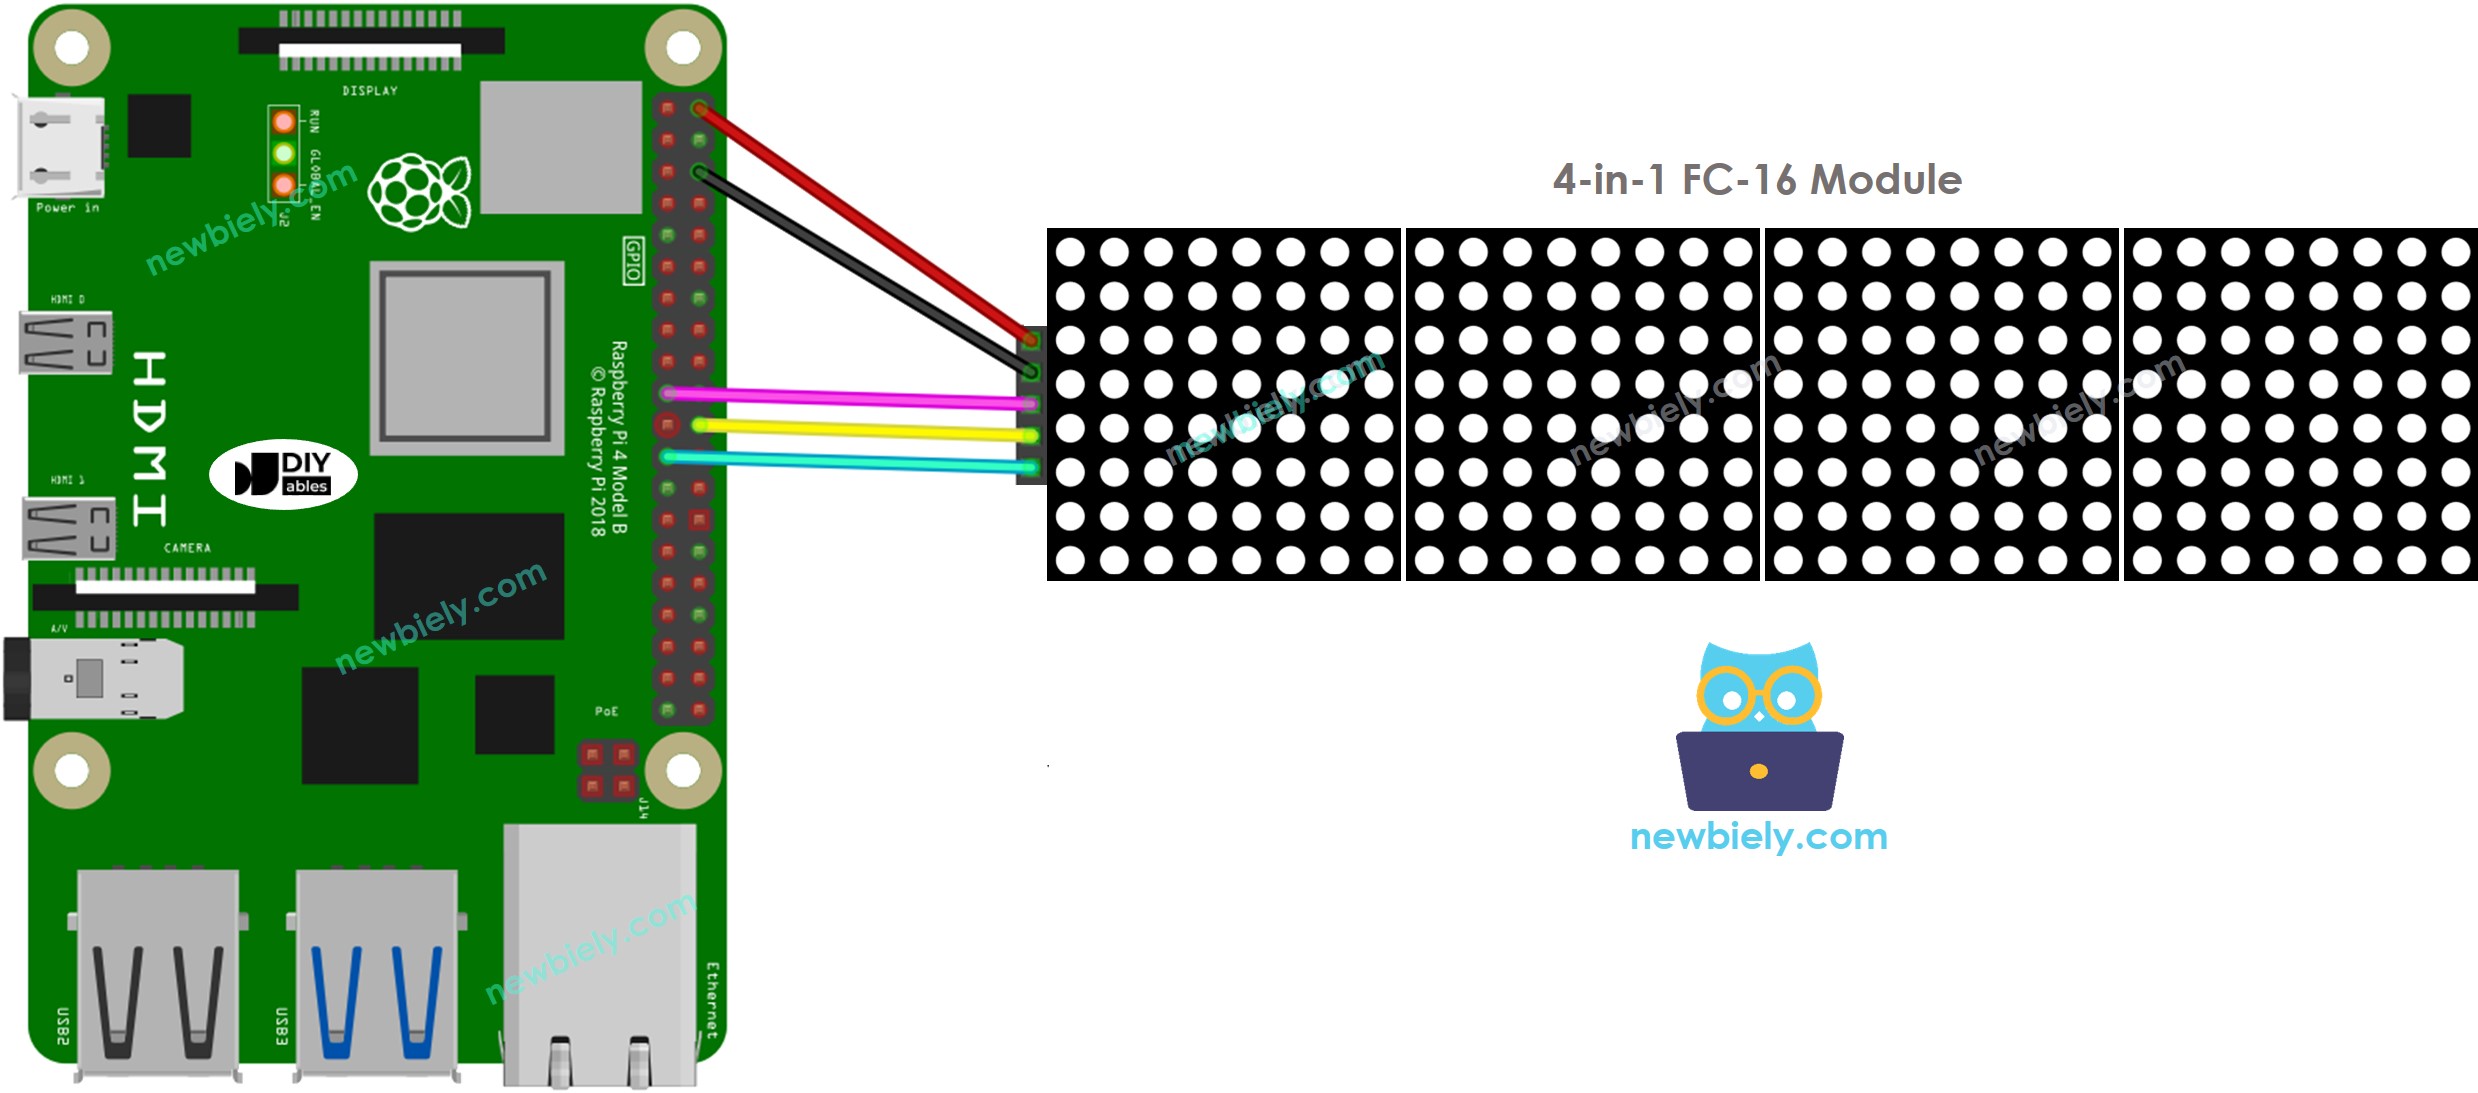 The wiring diagram between Raspberry Pi and LED matrix display